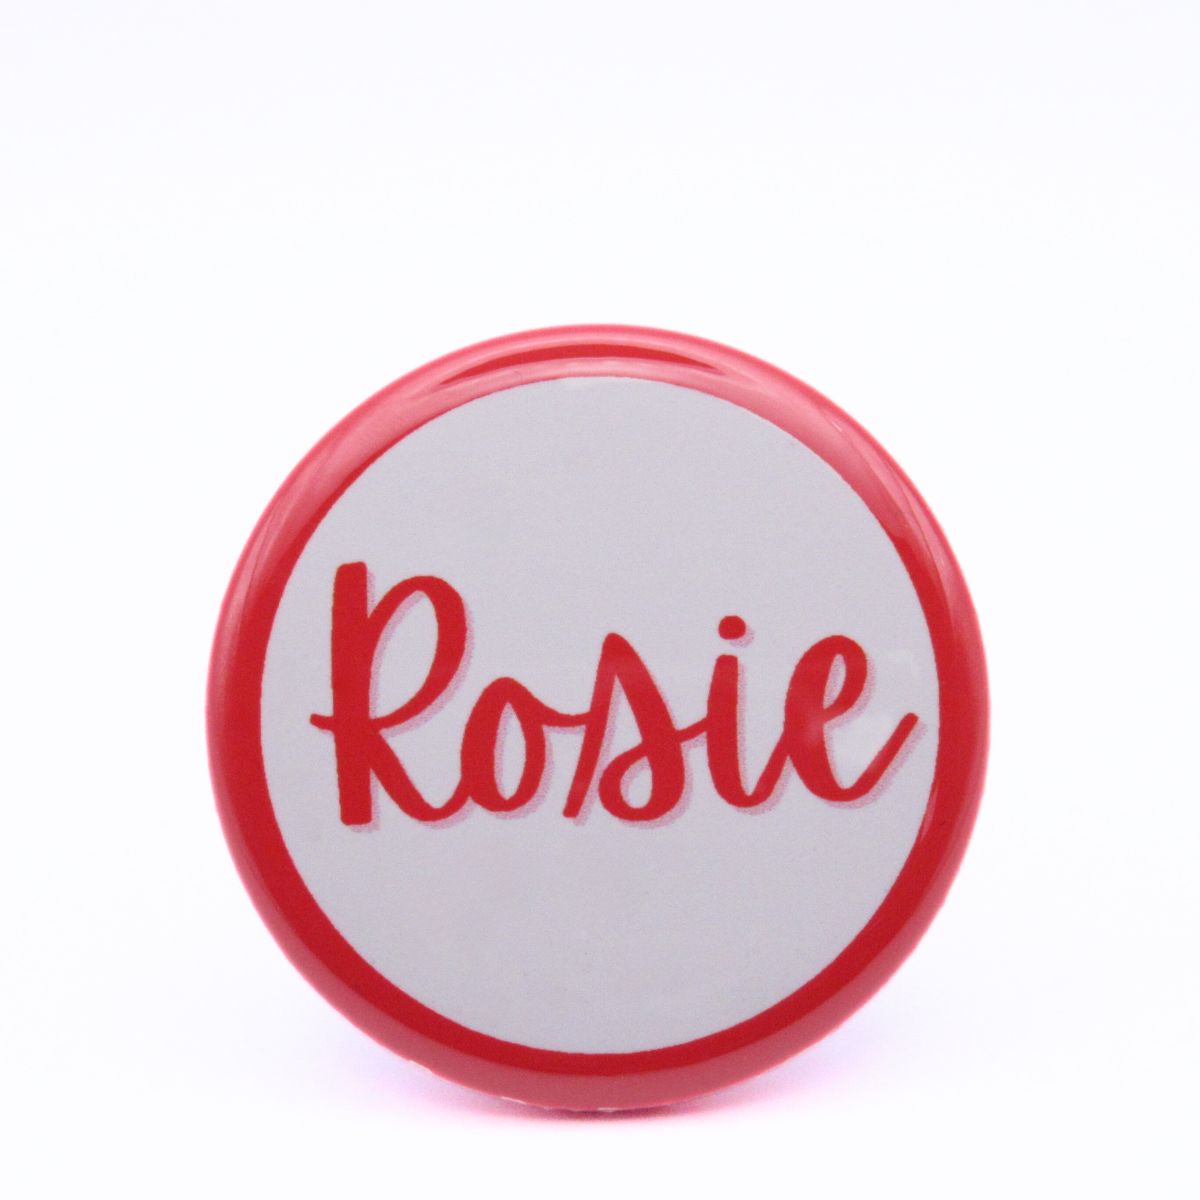 BooBooRoo Pinback Button (i.e. button, badge, pin) of a name badge with the name, "Rosie" in homage to Rosie the Riveter's uniform.